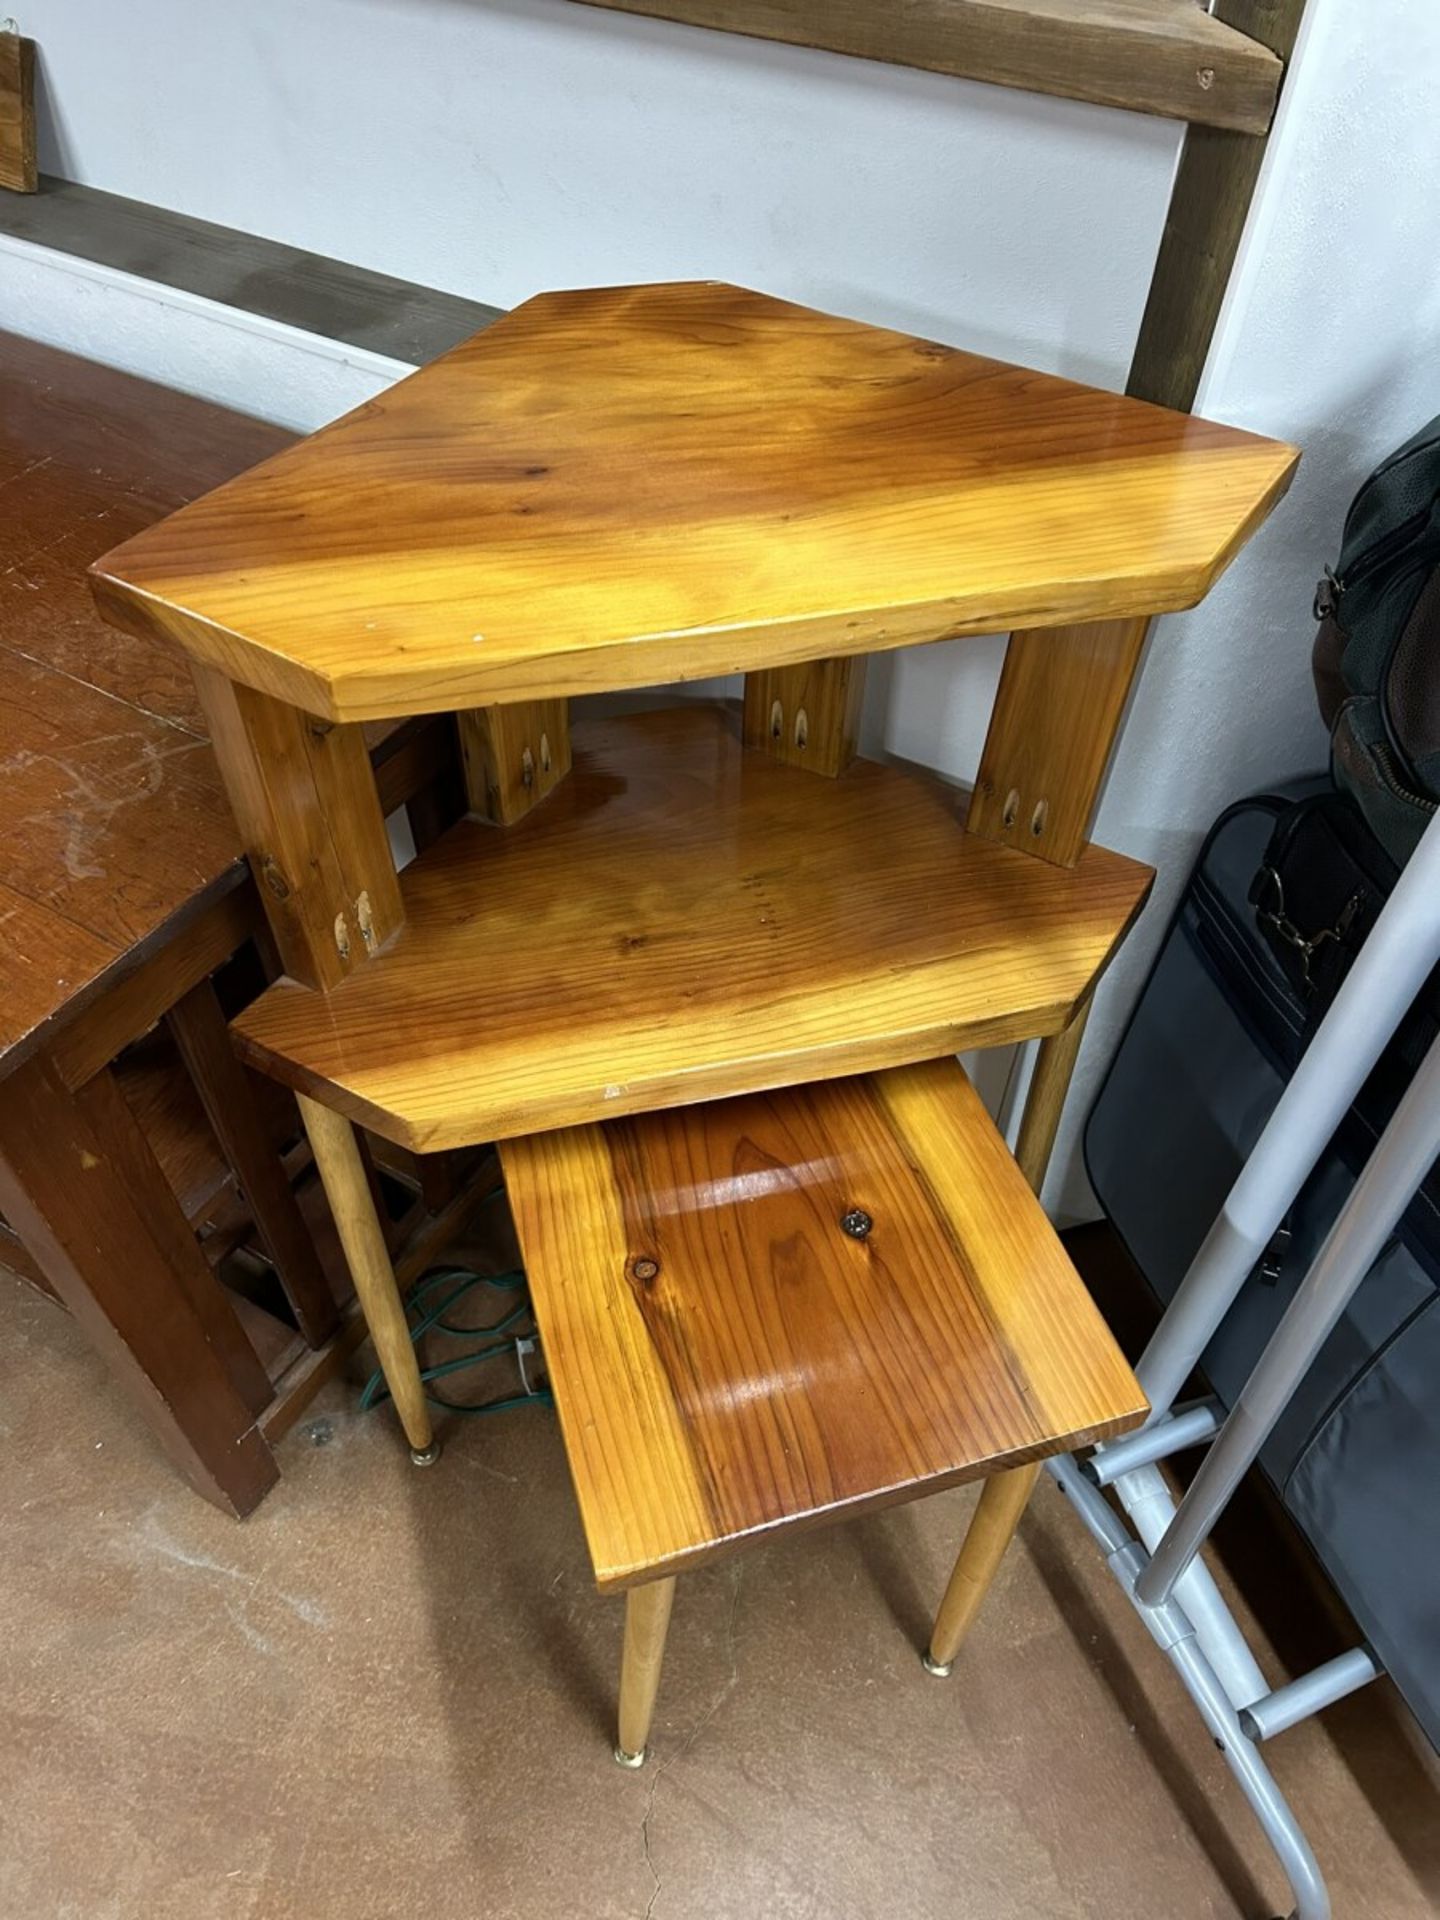 WOOD TABLE W/CORNER STANDS 27X48X30.5 - Image 4 of 4